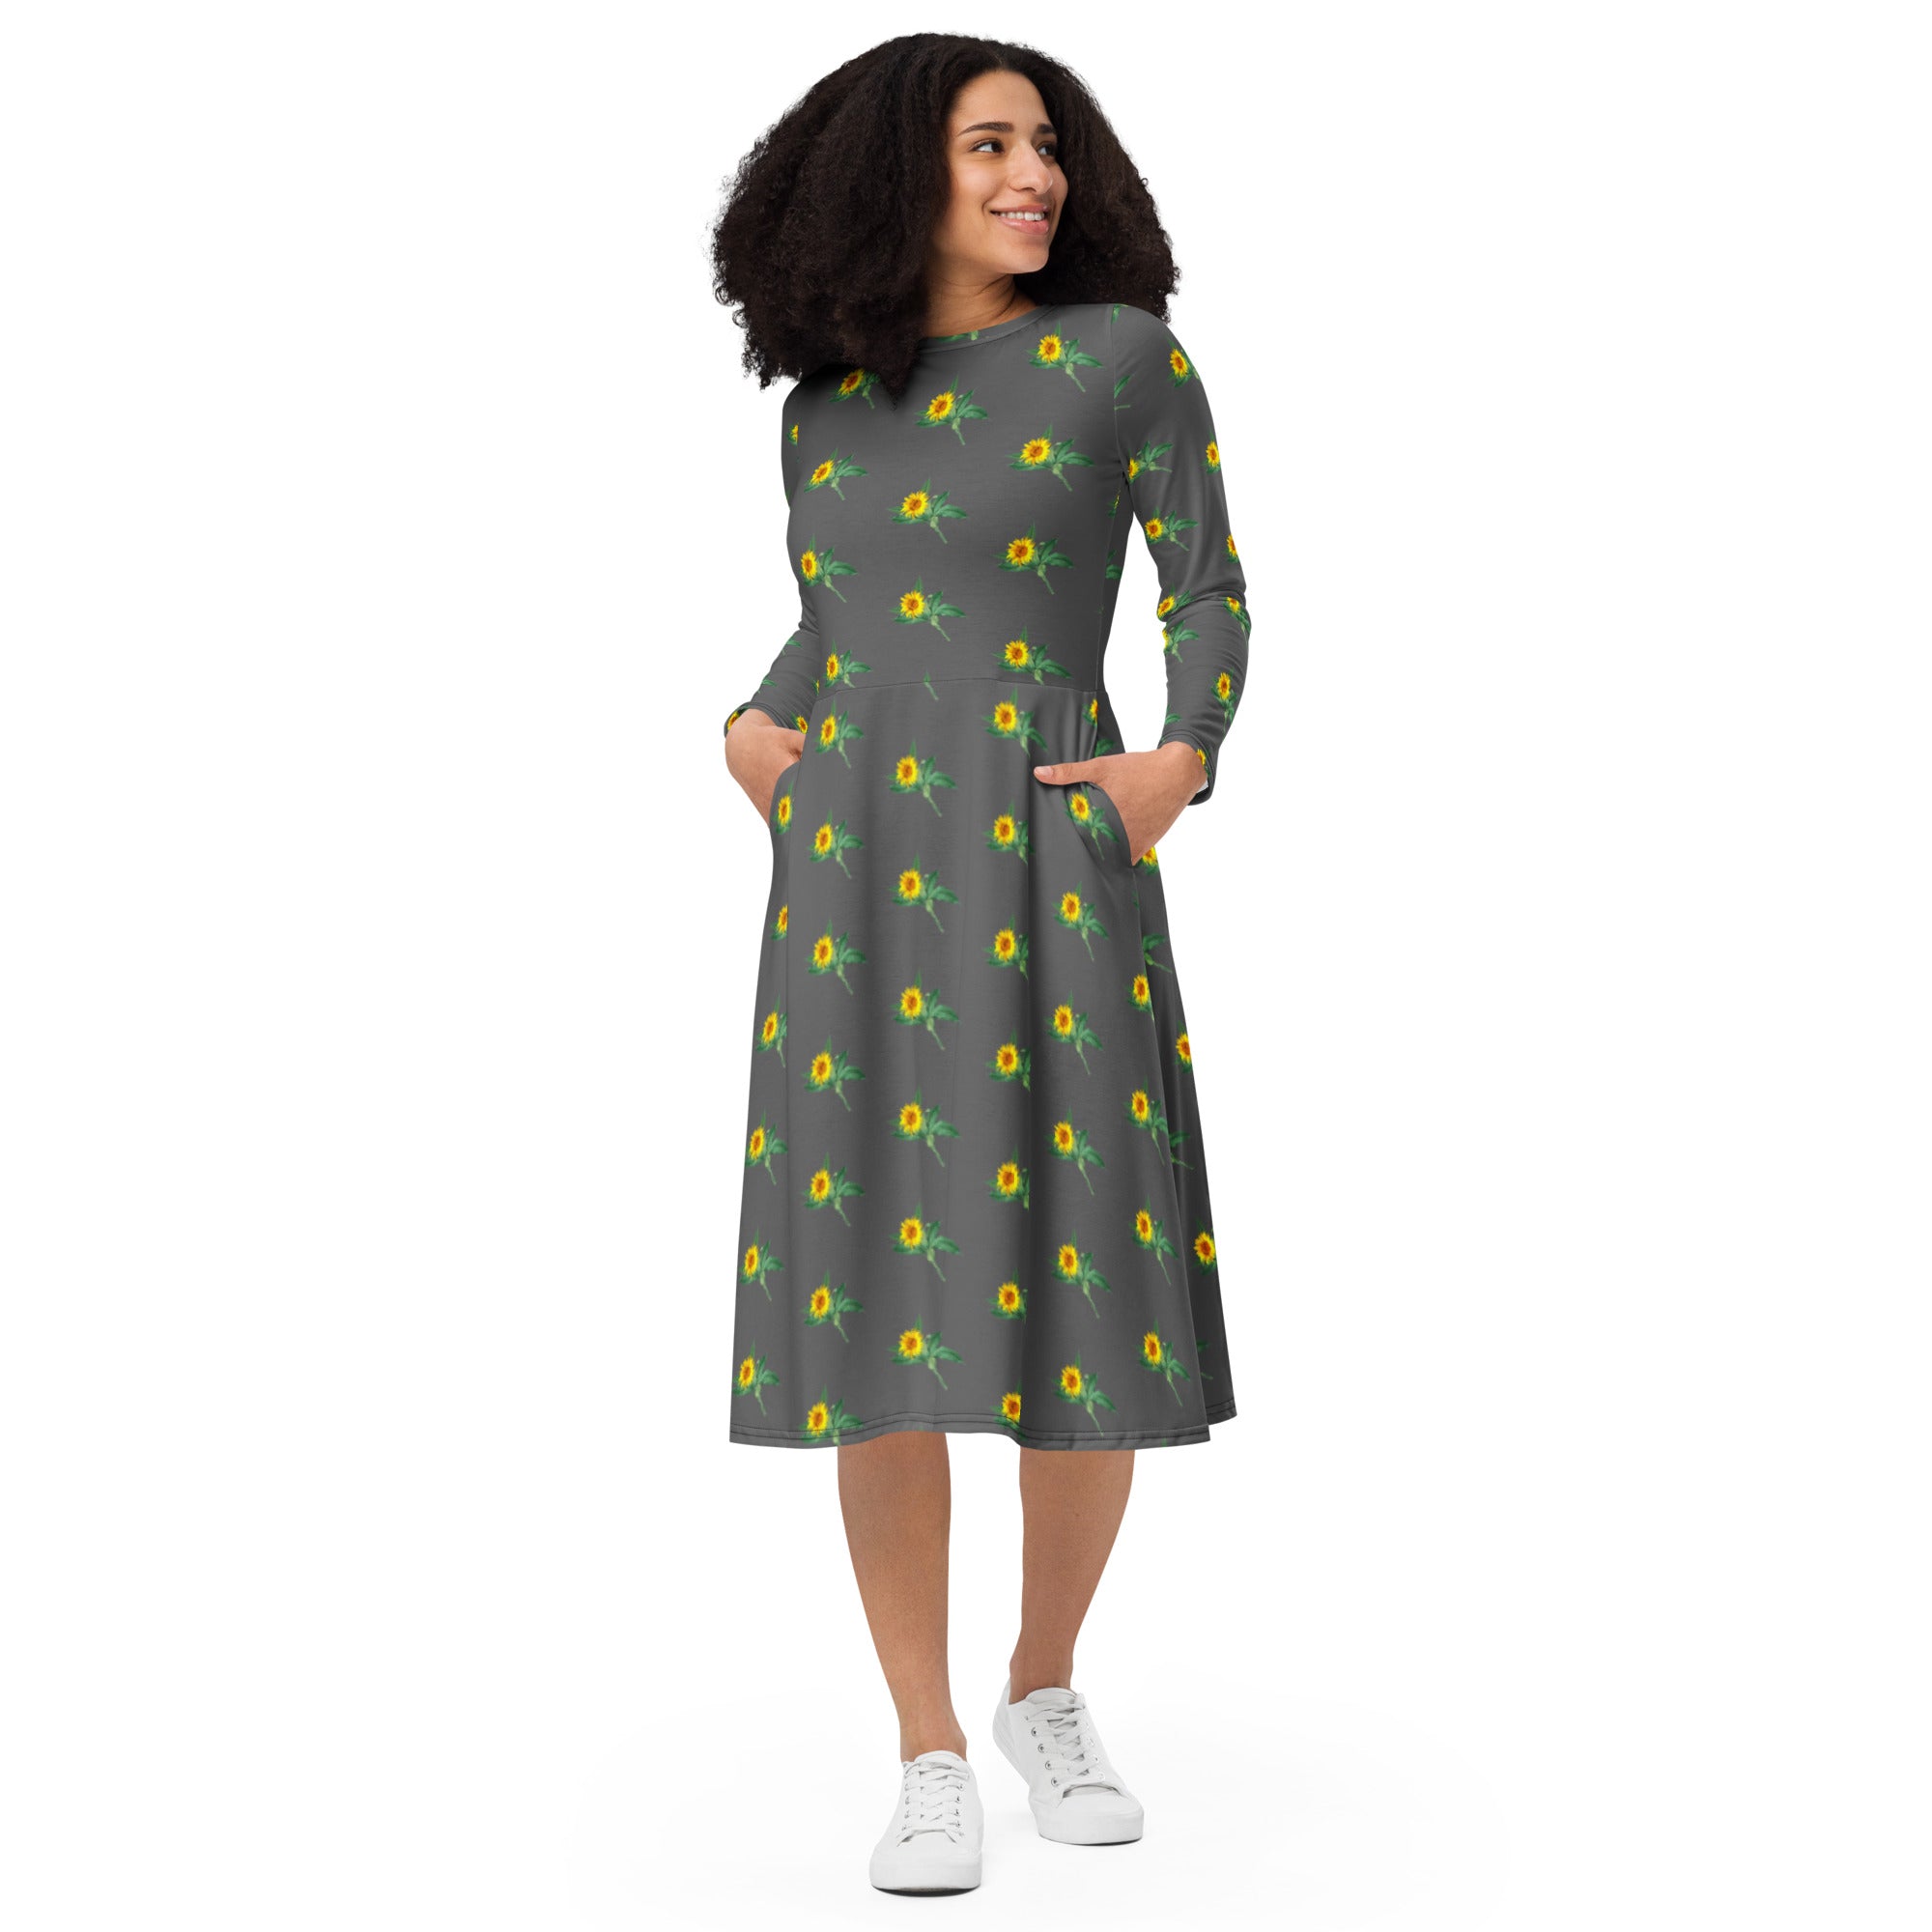 Grey Floral Print Women's Dress, Long Sleeve Floral Print Elegant Midi Dress For Women - Made in EU (US Size: 2XS-6XL) Plus Size Available For Curvy Ladies, Plus Size Women's Dresses, Plus Size Fit & Flare And A-Line Dresses For Women